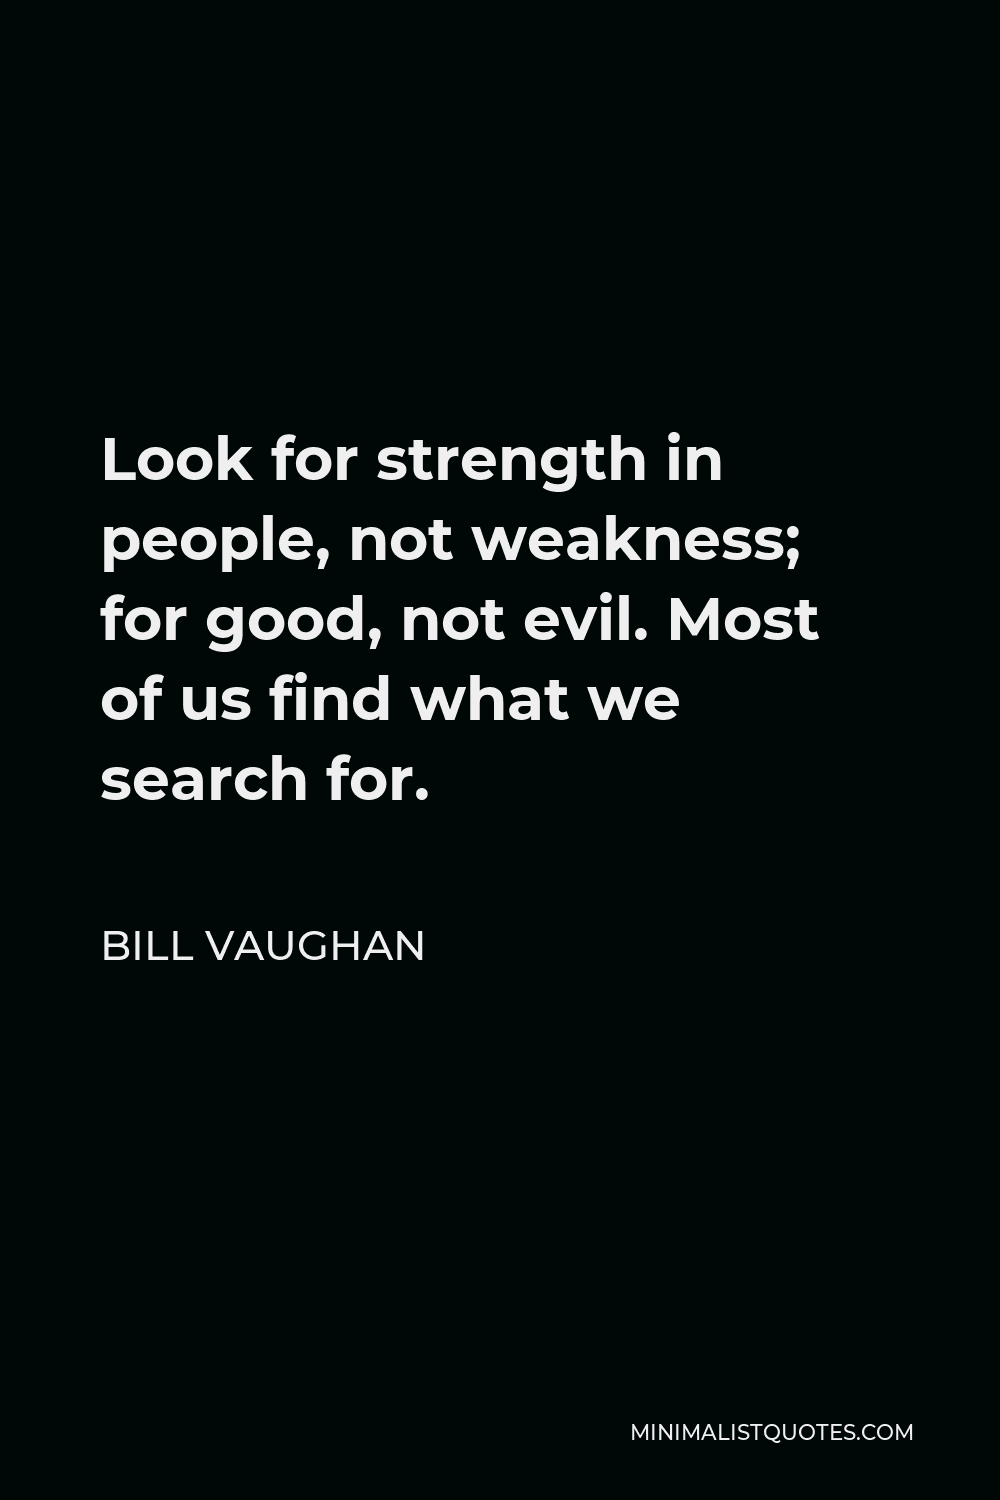 Bill Vaughan Quote - Look for strength in people, not weakness; for good, not evil. Most of us find what we search for.